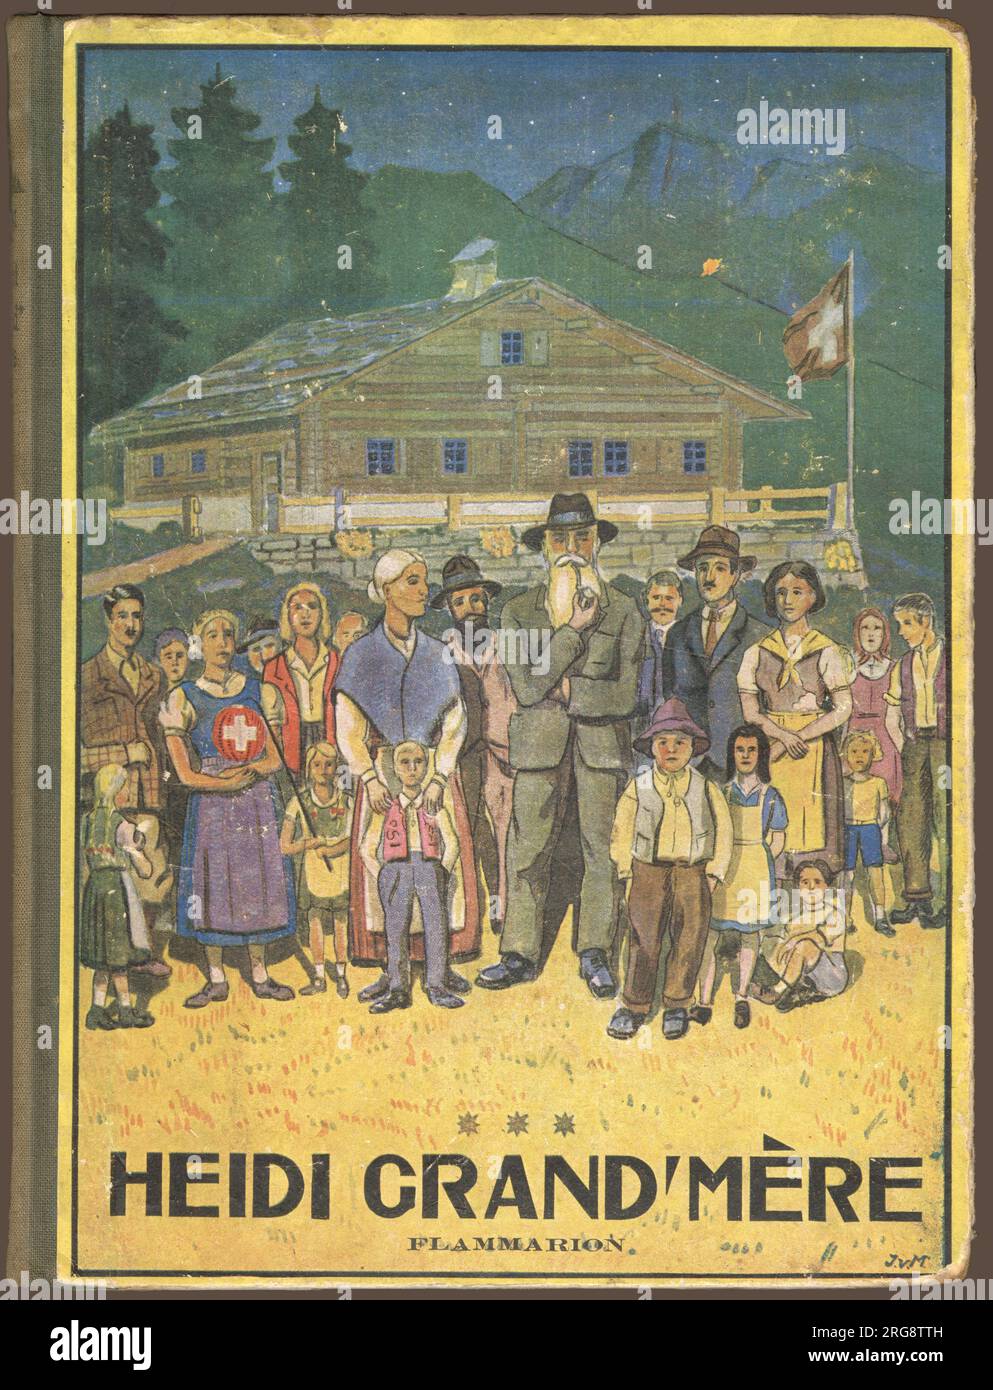 A large gathering of Swiss people, presumably Heidi's grandparents and other relatives, outside a typical Swiss building. Stock Photo